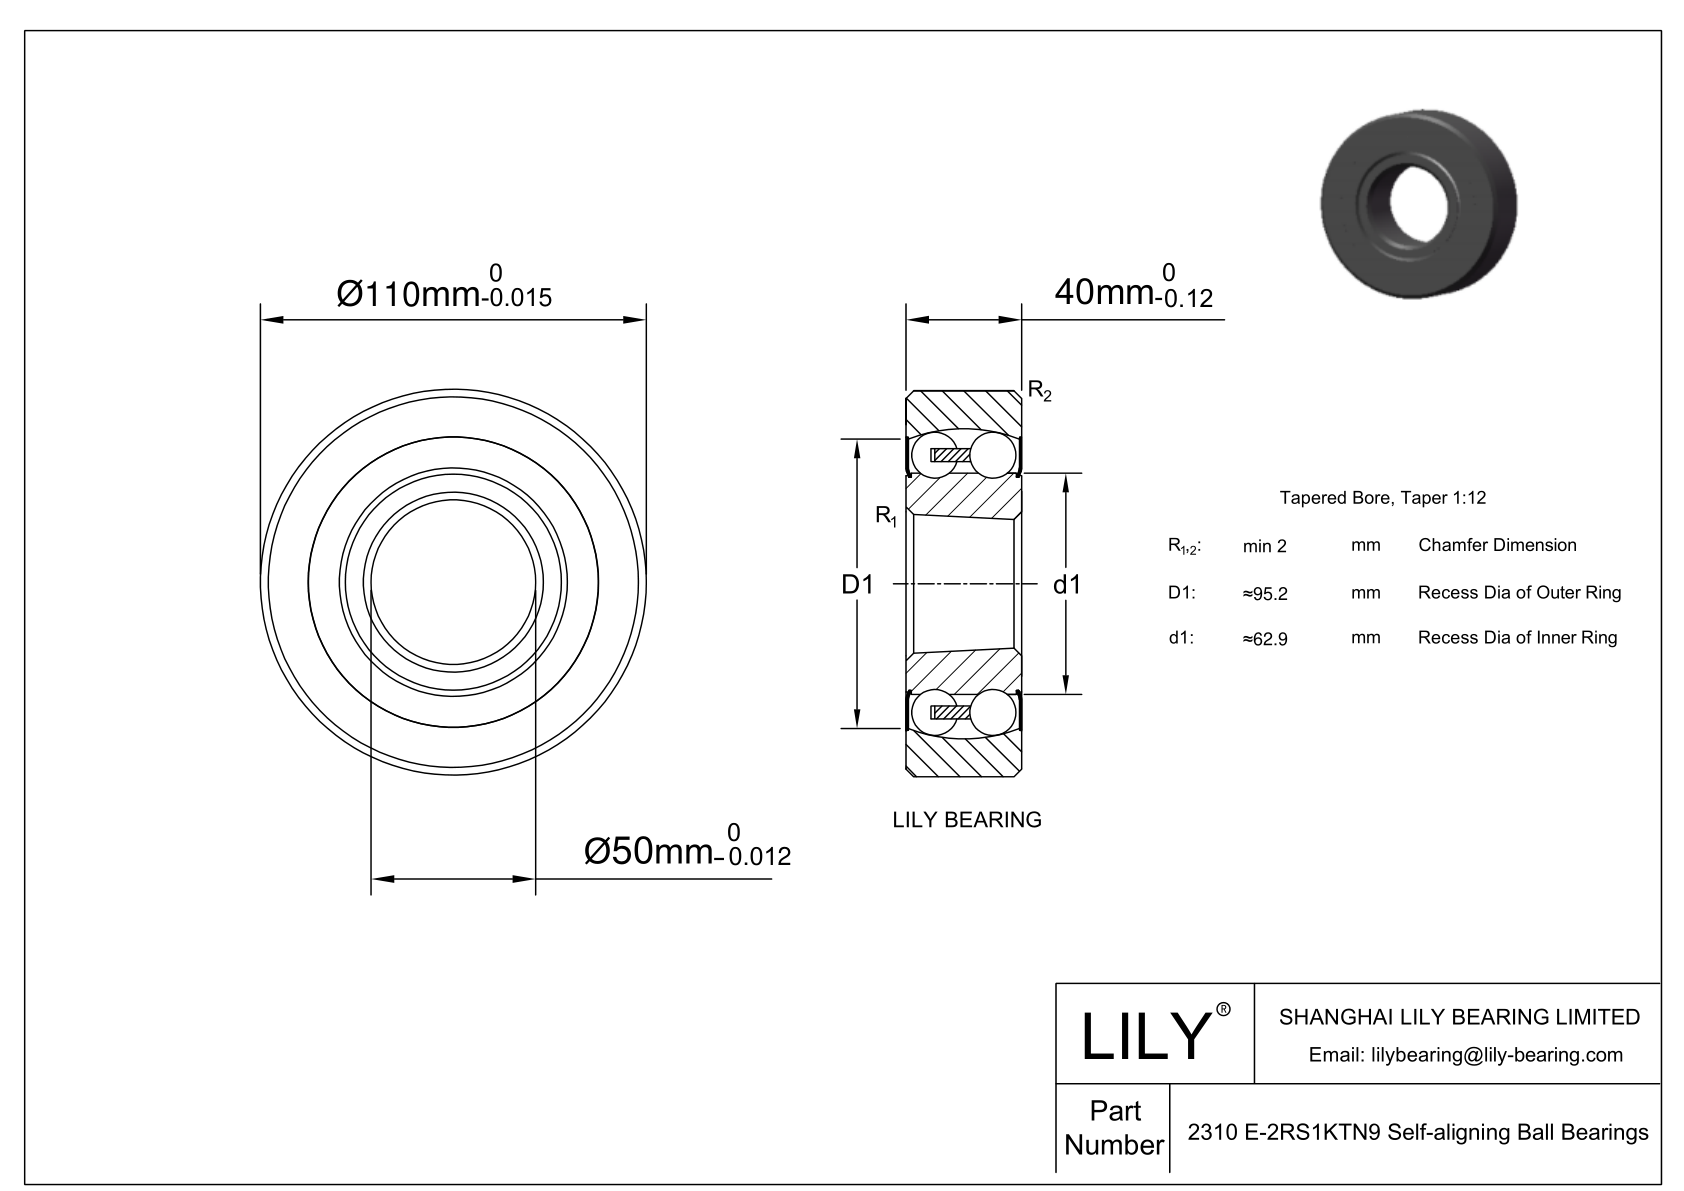 S2310 E-2RS1KTN9 Stainless Steel Self Aligning Ball Bearings cad drawing